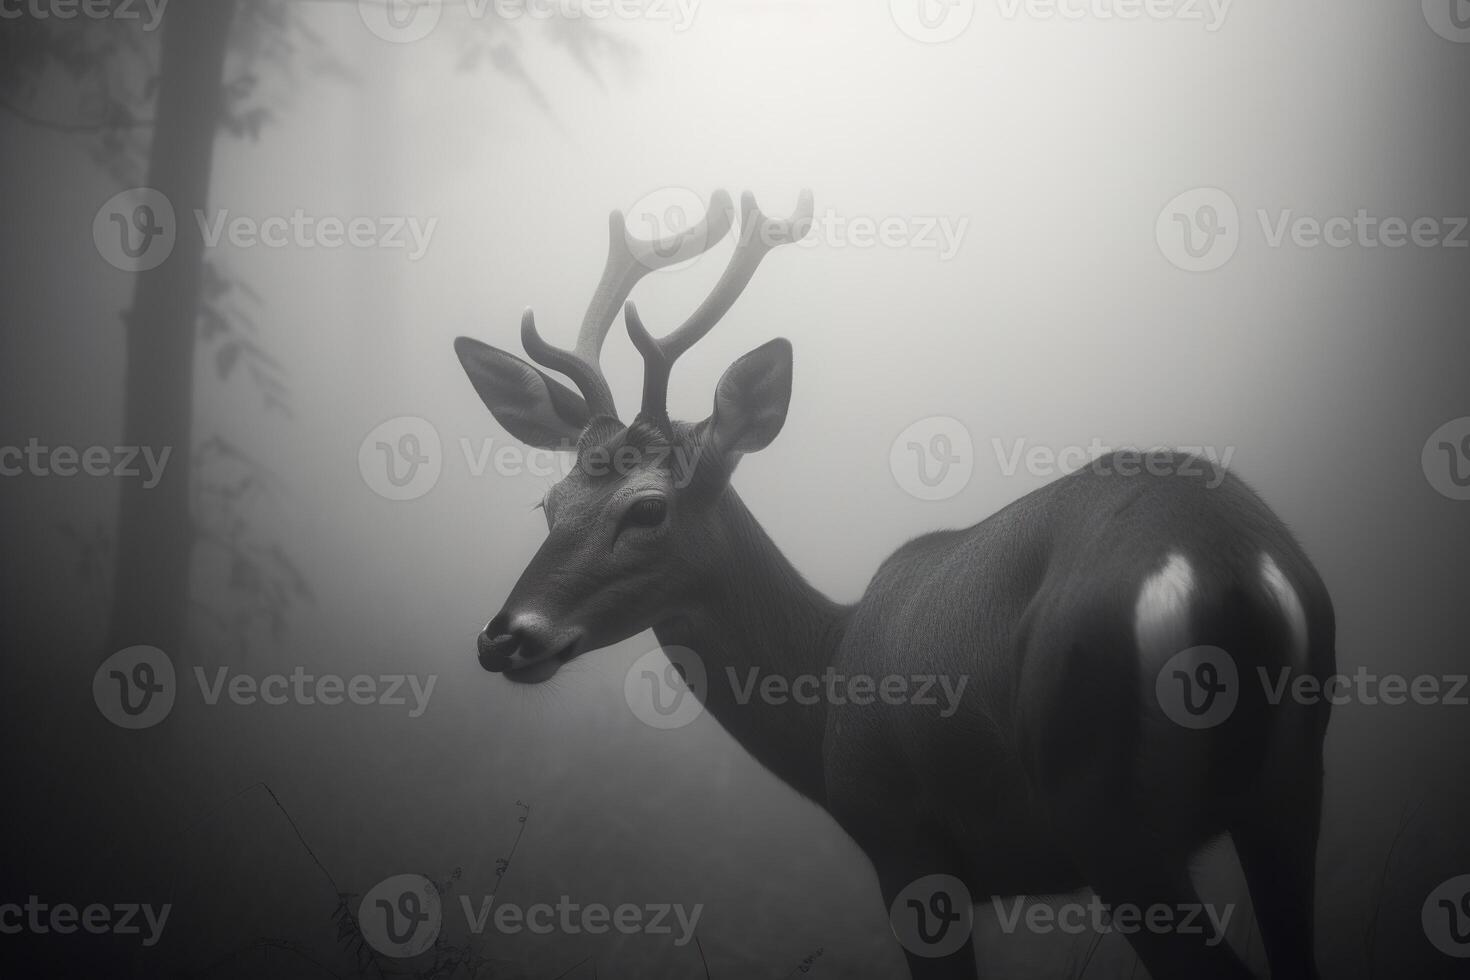 a deer in a misty forest. photo